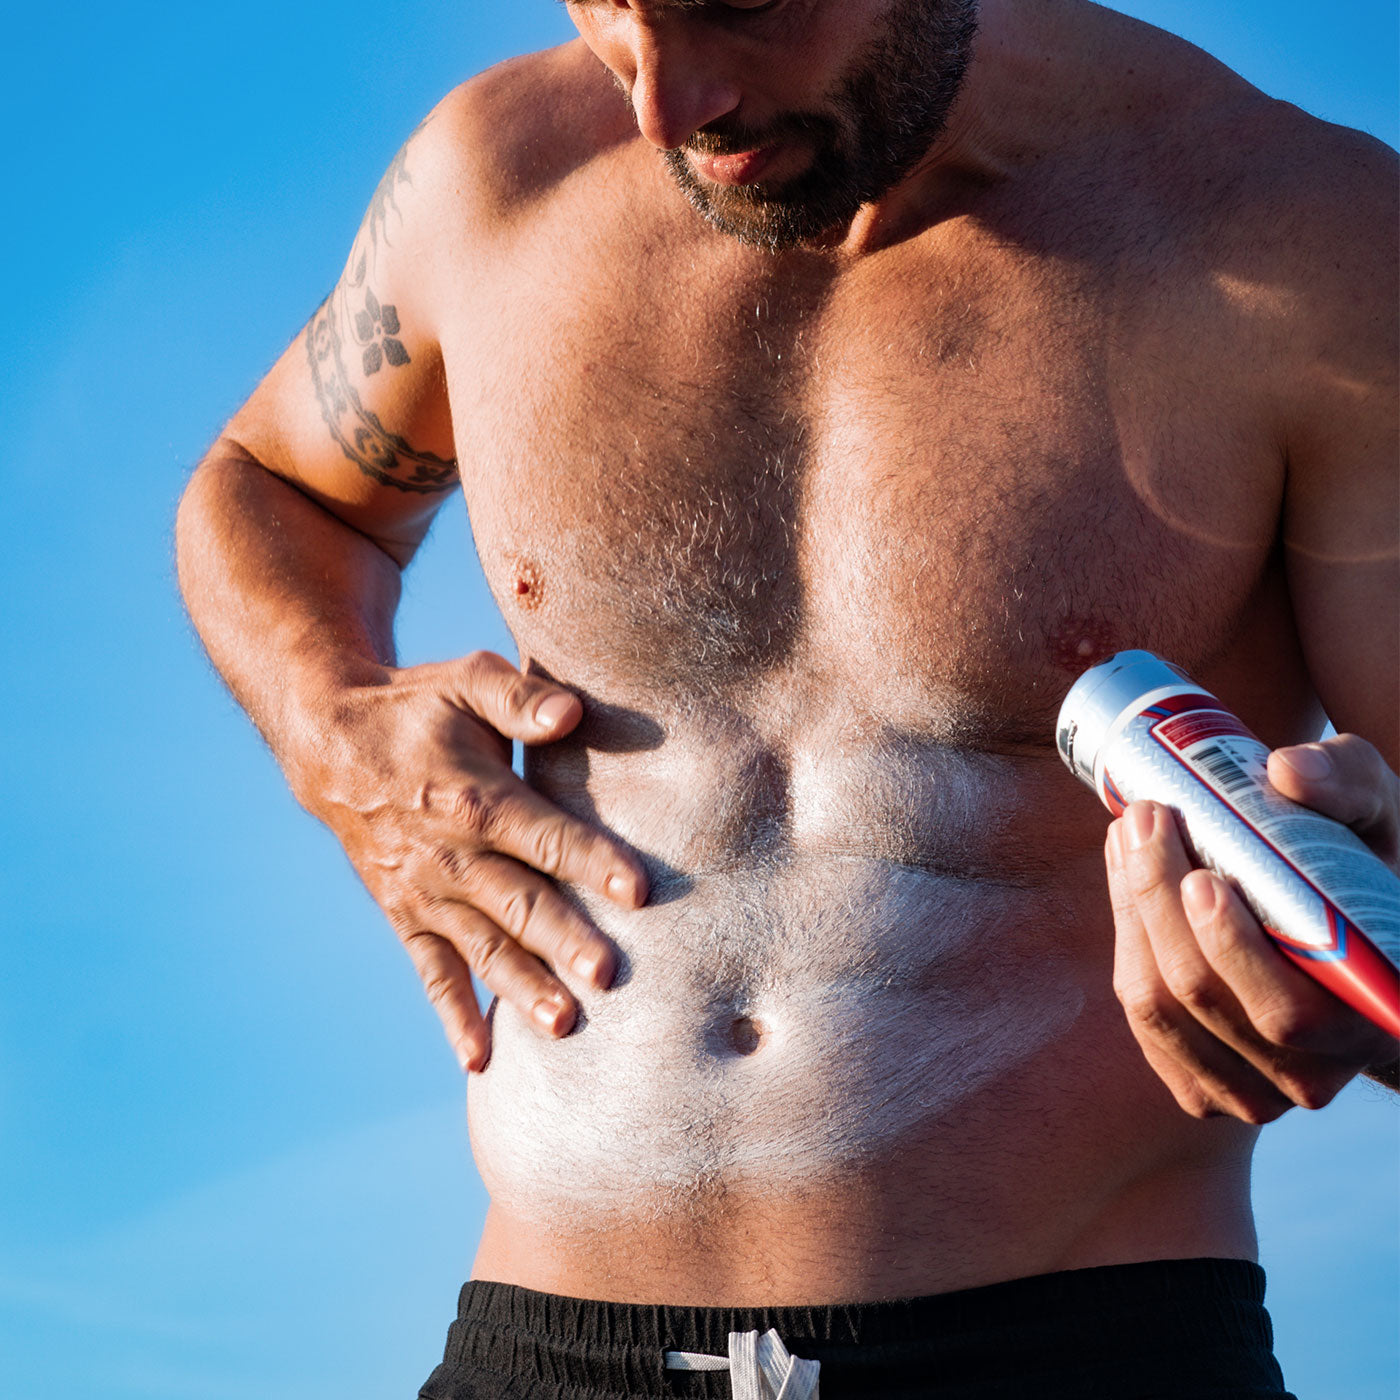 Man applying Abs of Steel Cream in the sun for ripped abs